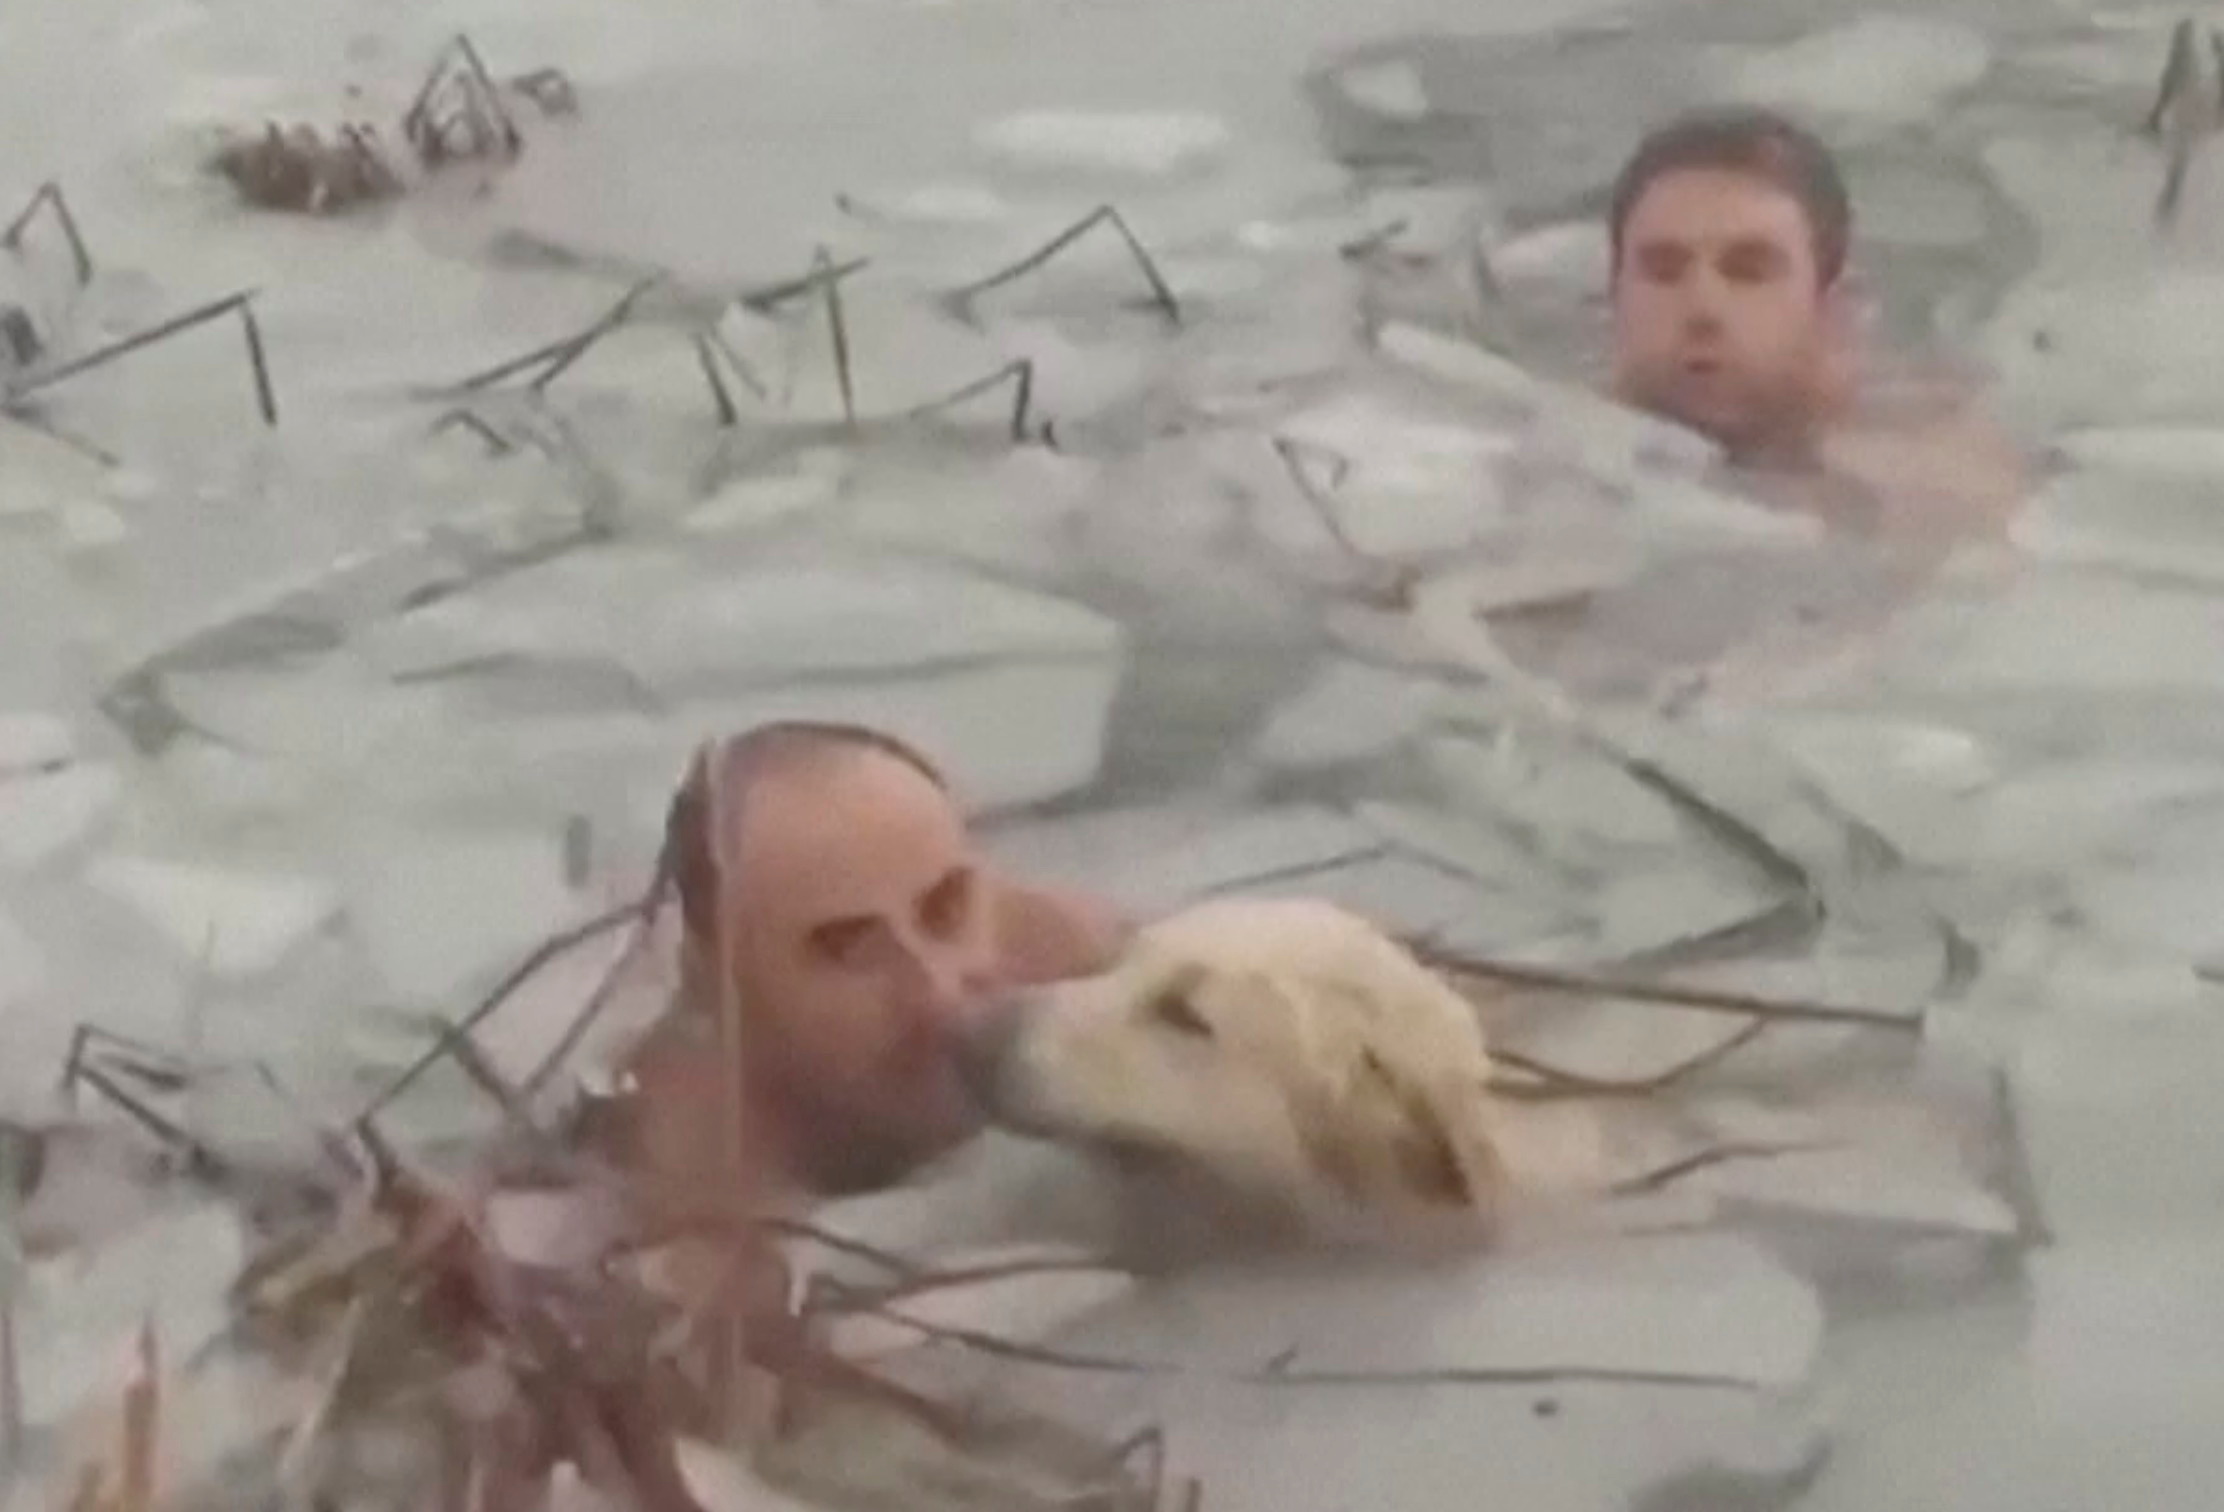 Police rescue dog from frozen reservoir as cold front hits Spain